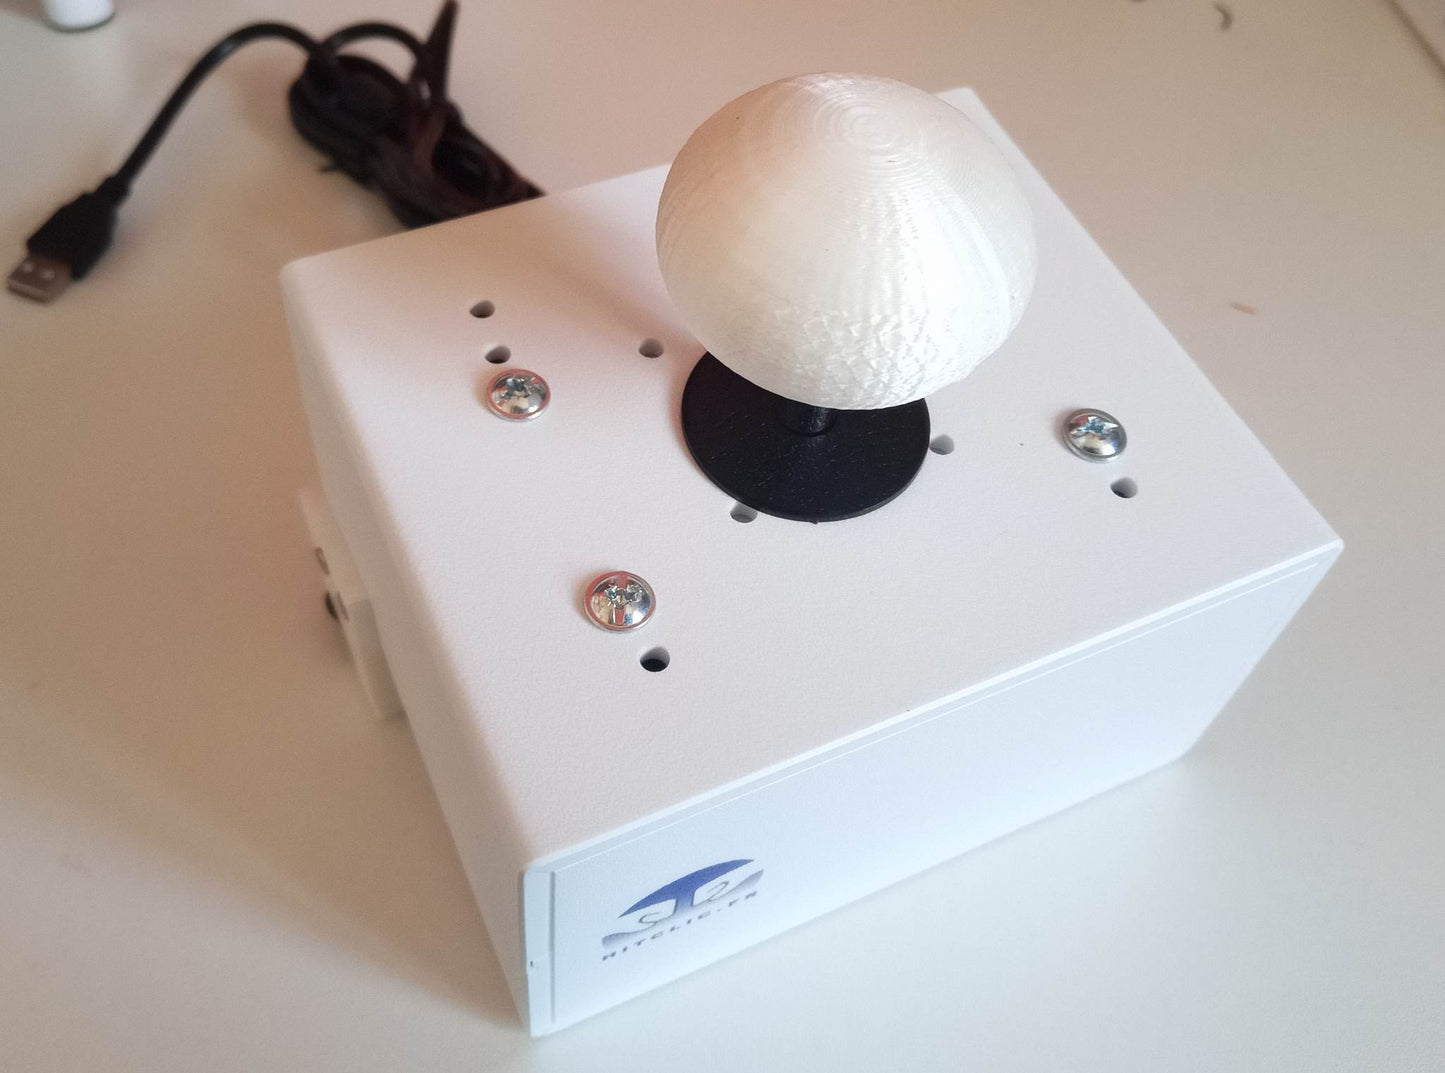 Arcade joystick - for the foot